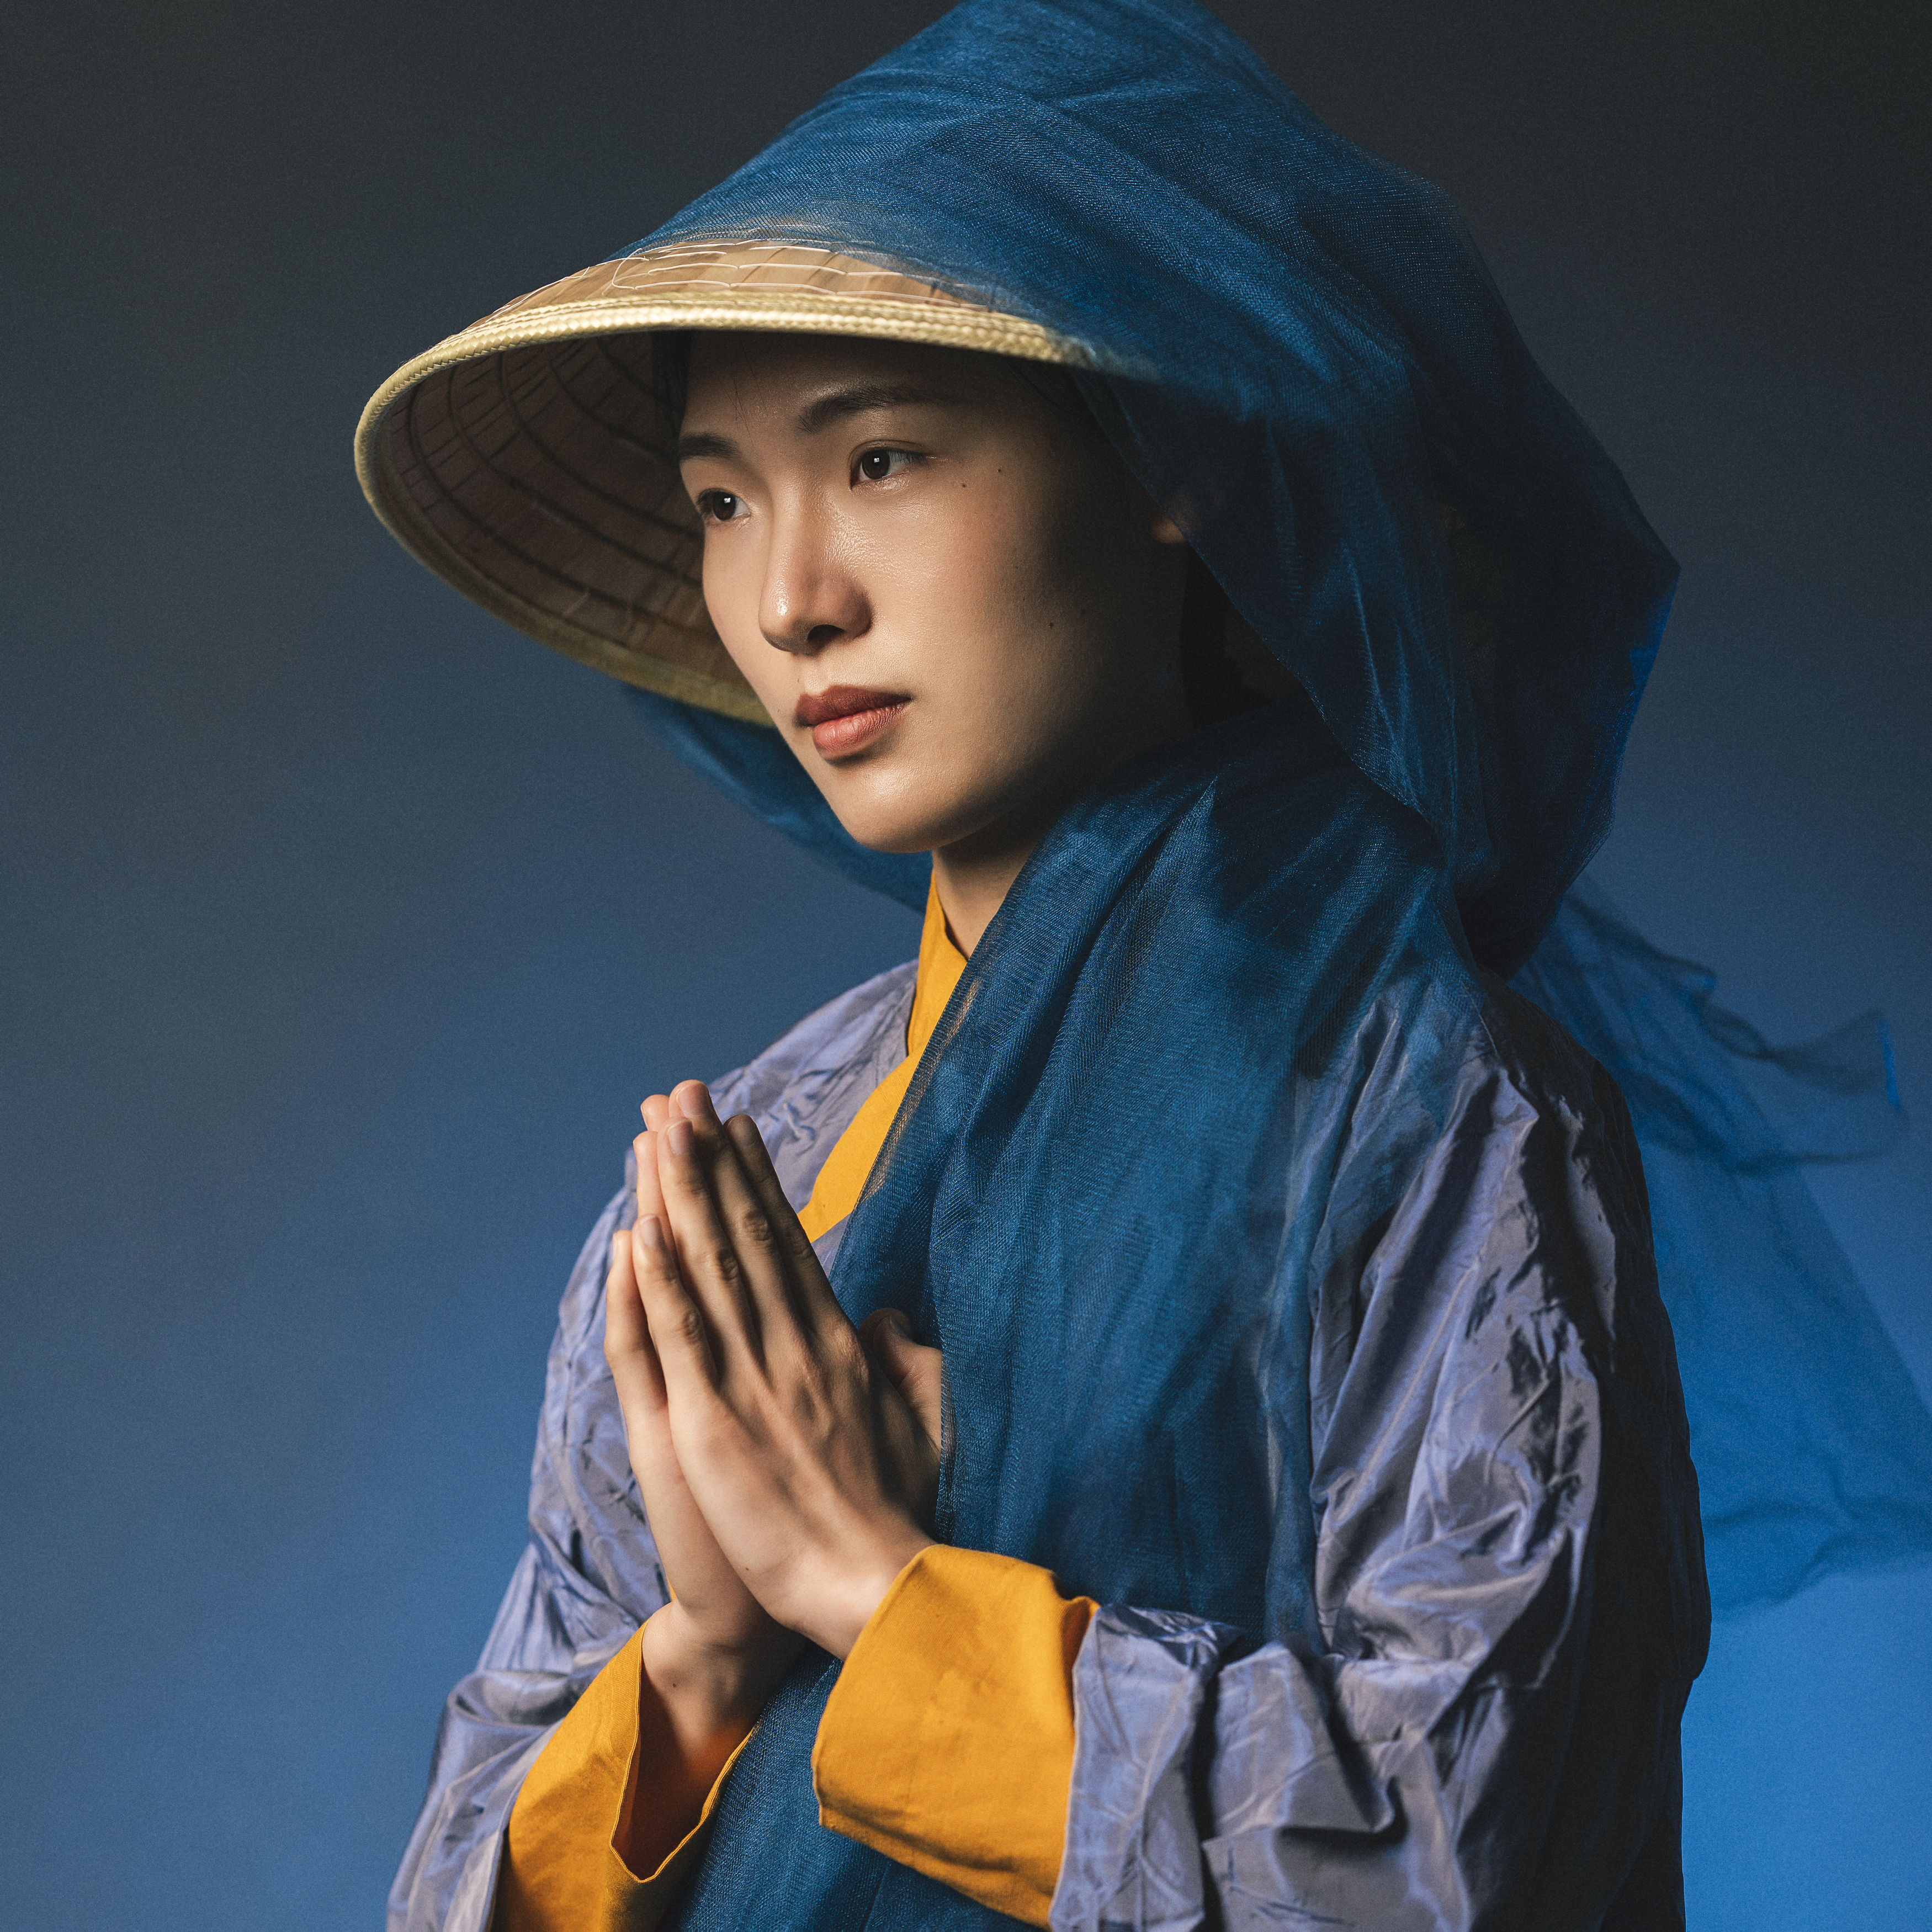 back view, beauty, chinese girl, dreaminess, elegance, fashion, femininity, hat, human face, individuality, indoors, lifestyles, looking, one person, portrait, pose, prayer, shadow, side view, standing, studio shot, traditional clothing, young woman, Alex Tsarfin